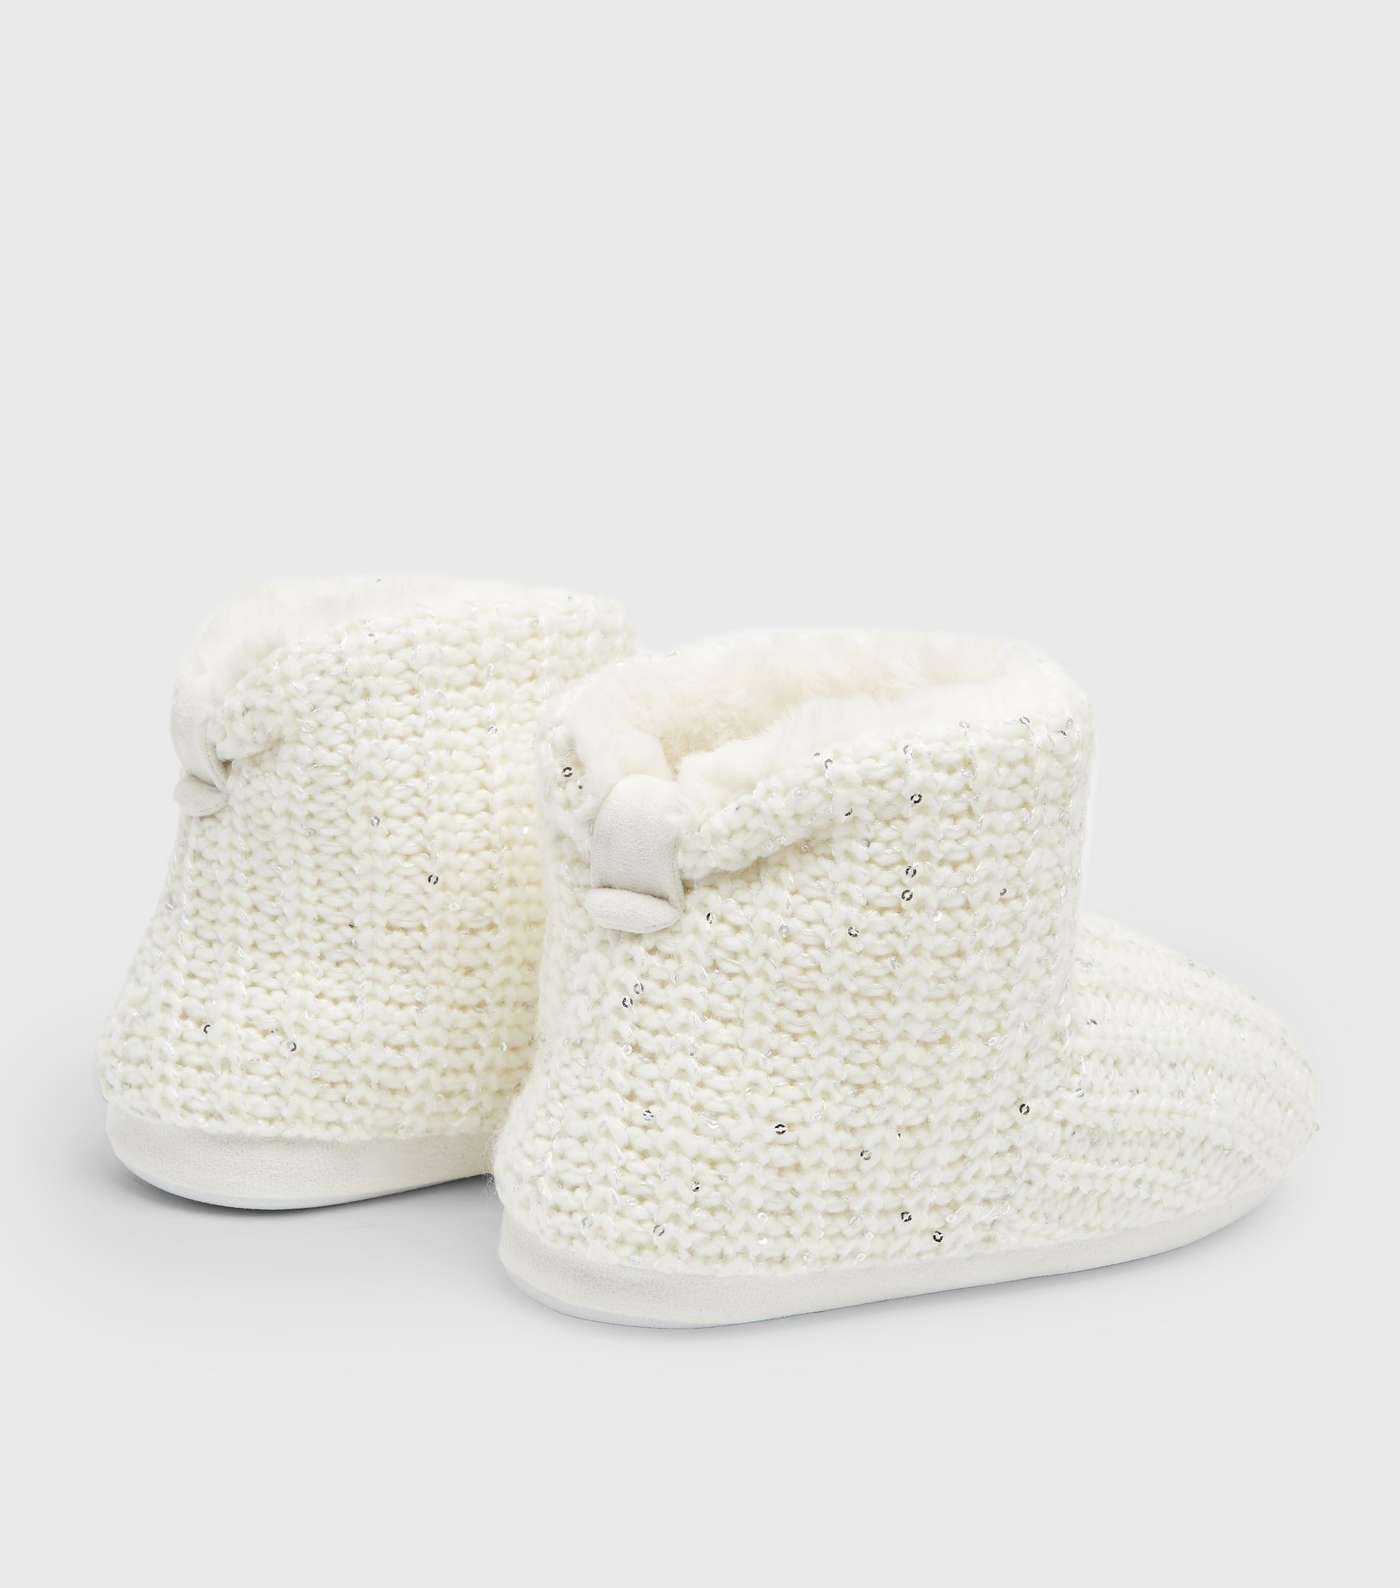 Off White Knit Sequin Faux Fur Lined Boot Slippers Image 4